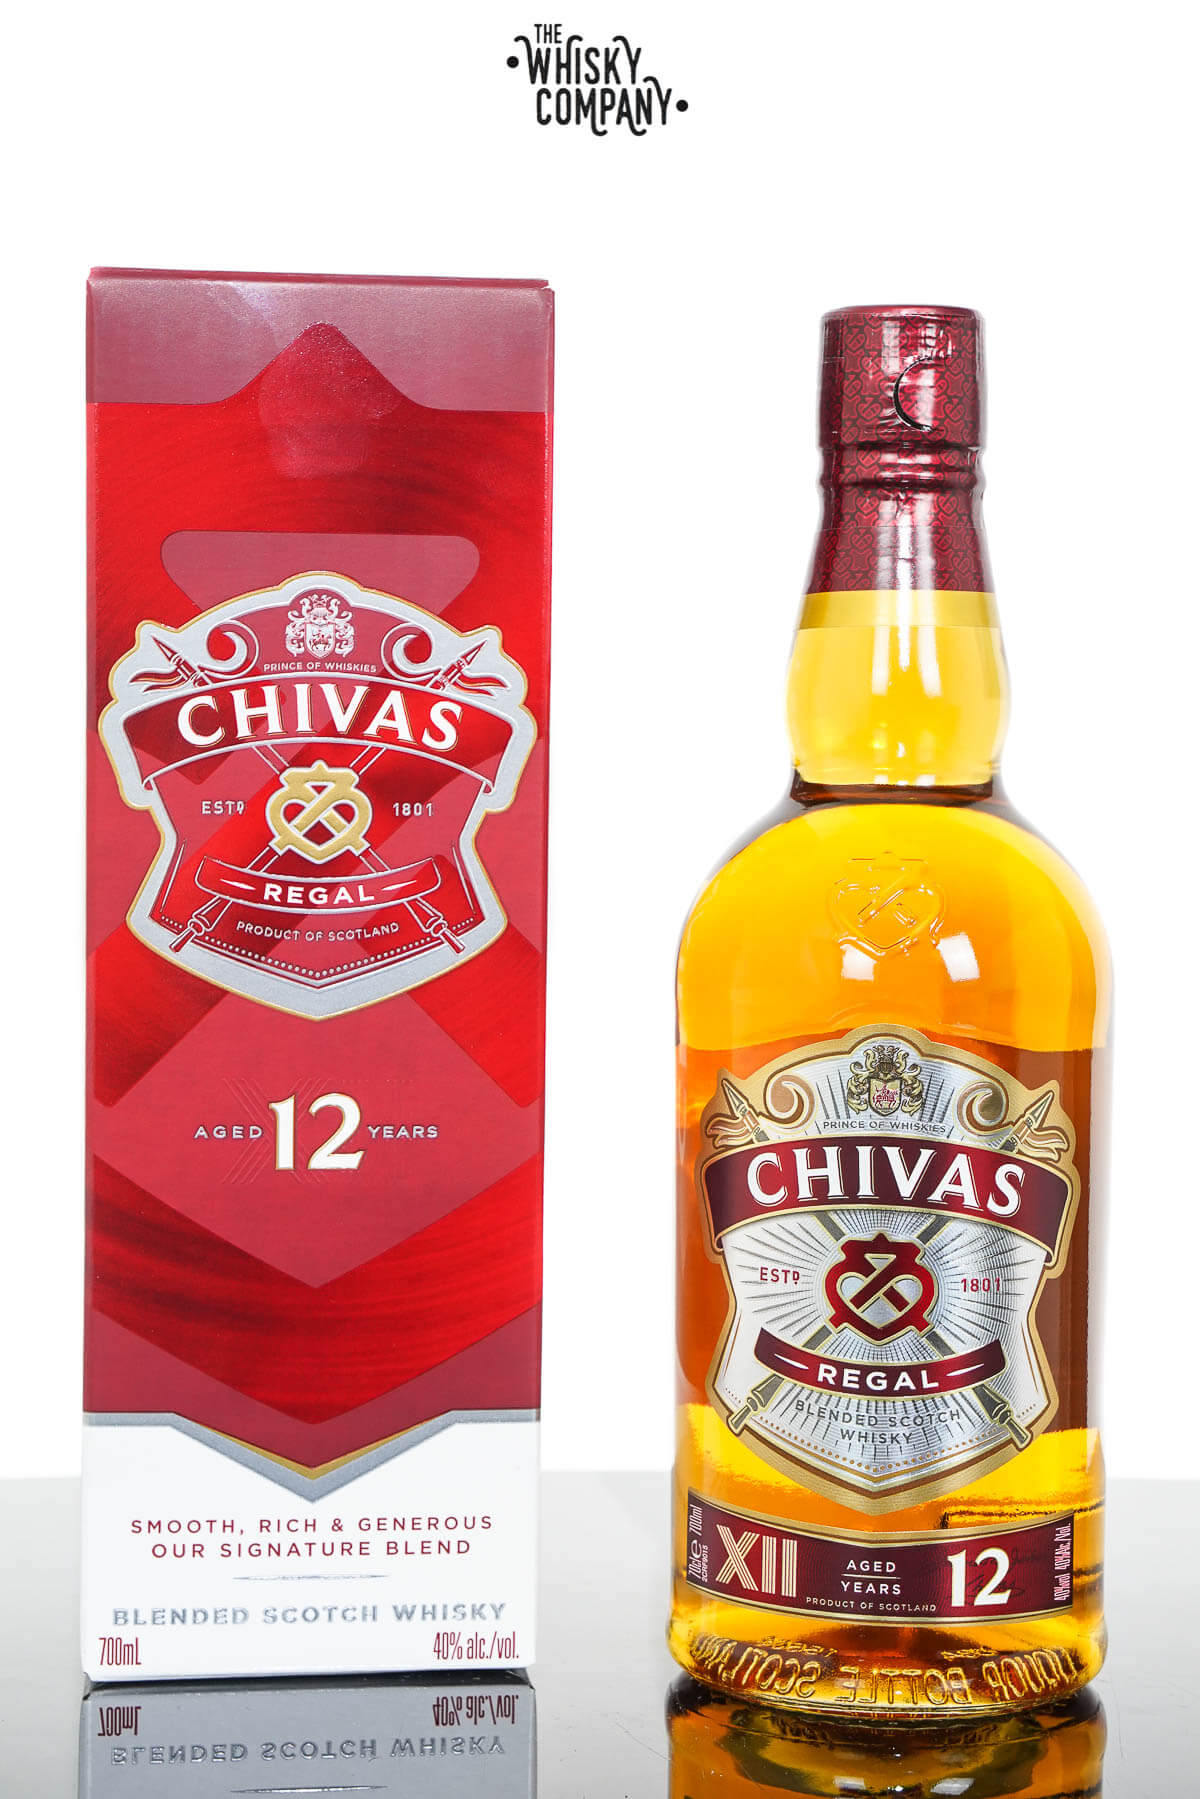 Chivas Regal 12 Year Blended Scotch Whisky Review 